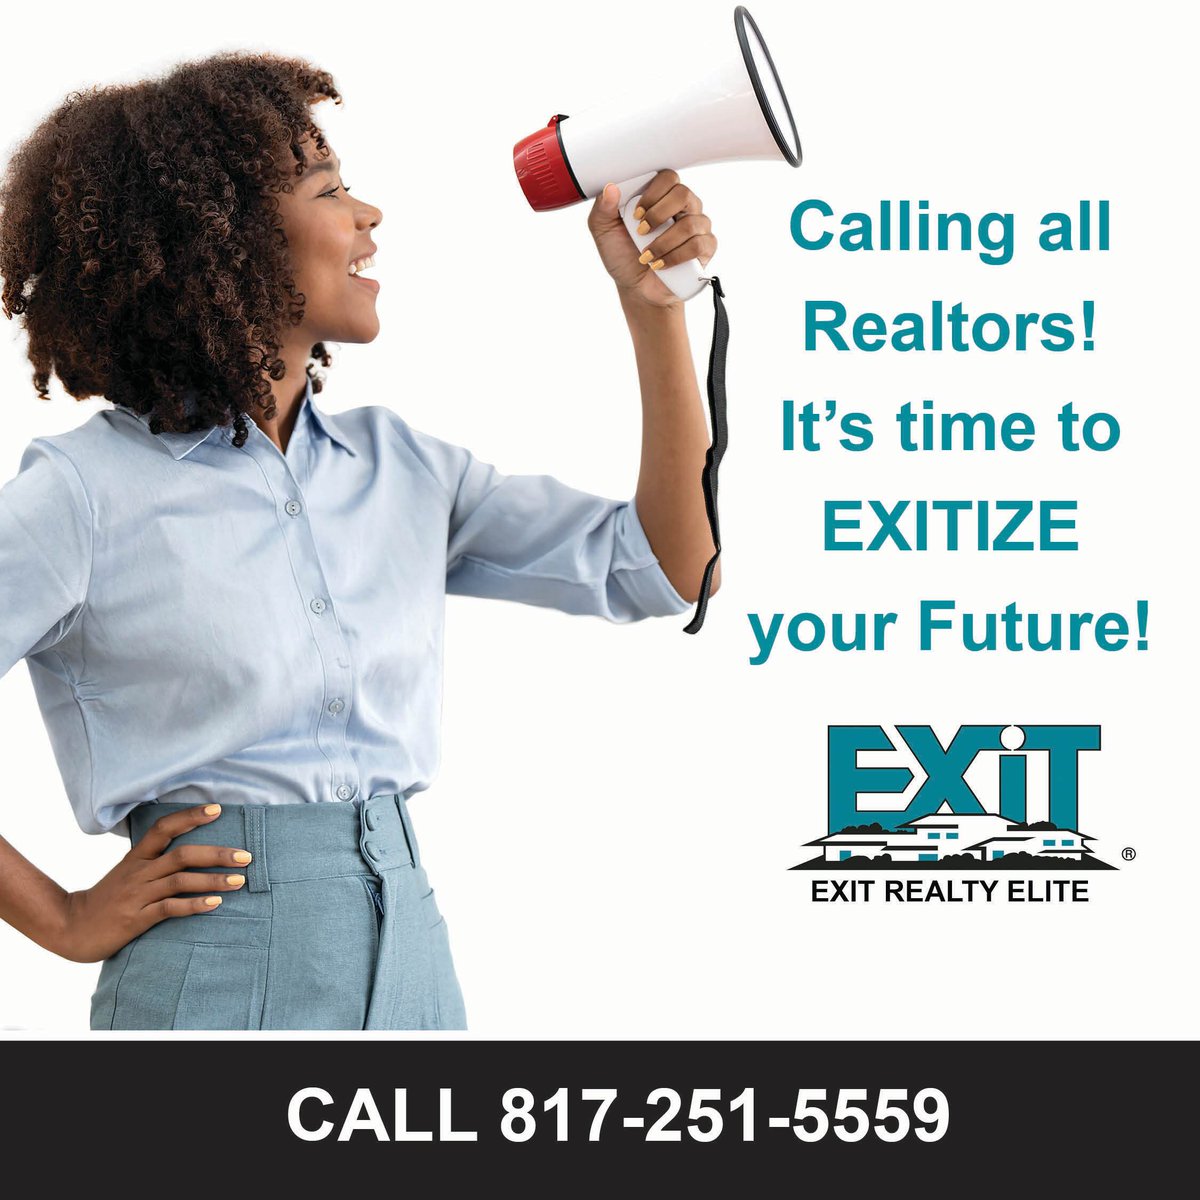 Calling all Realtors! Time to EXITIZE your future!

#LOVEXIT #ImSold #ThinkSmartThinkEXIT #RealEstateReinvented #ListwithEXIT #DFWMetroplex #buyahome #sellahome #EXITRealtyElite #RealEstateCareers #TexasRealEstate